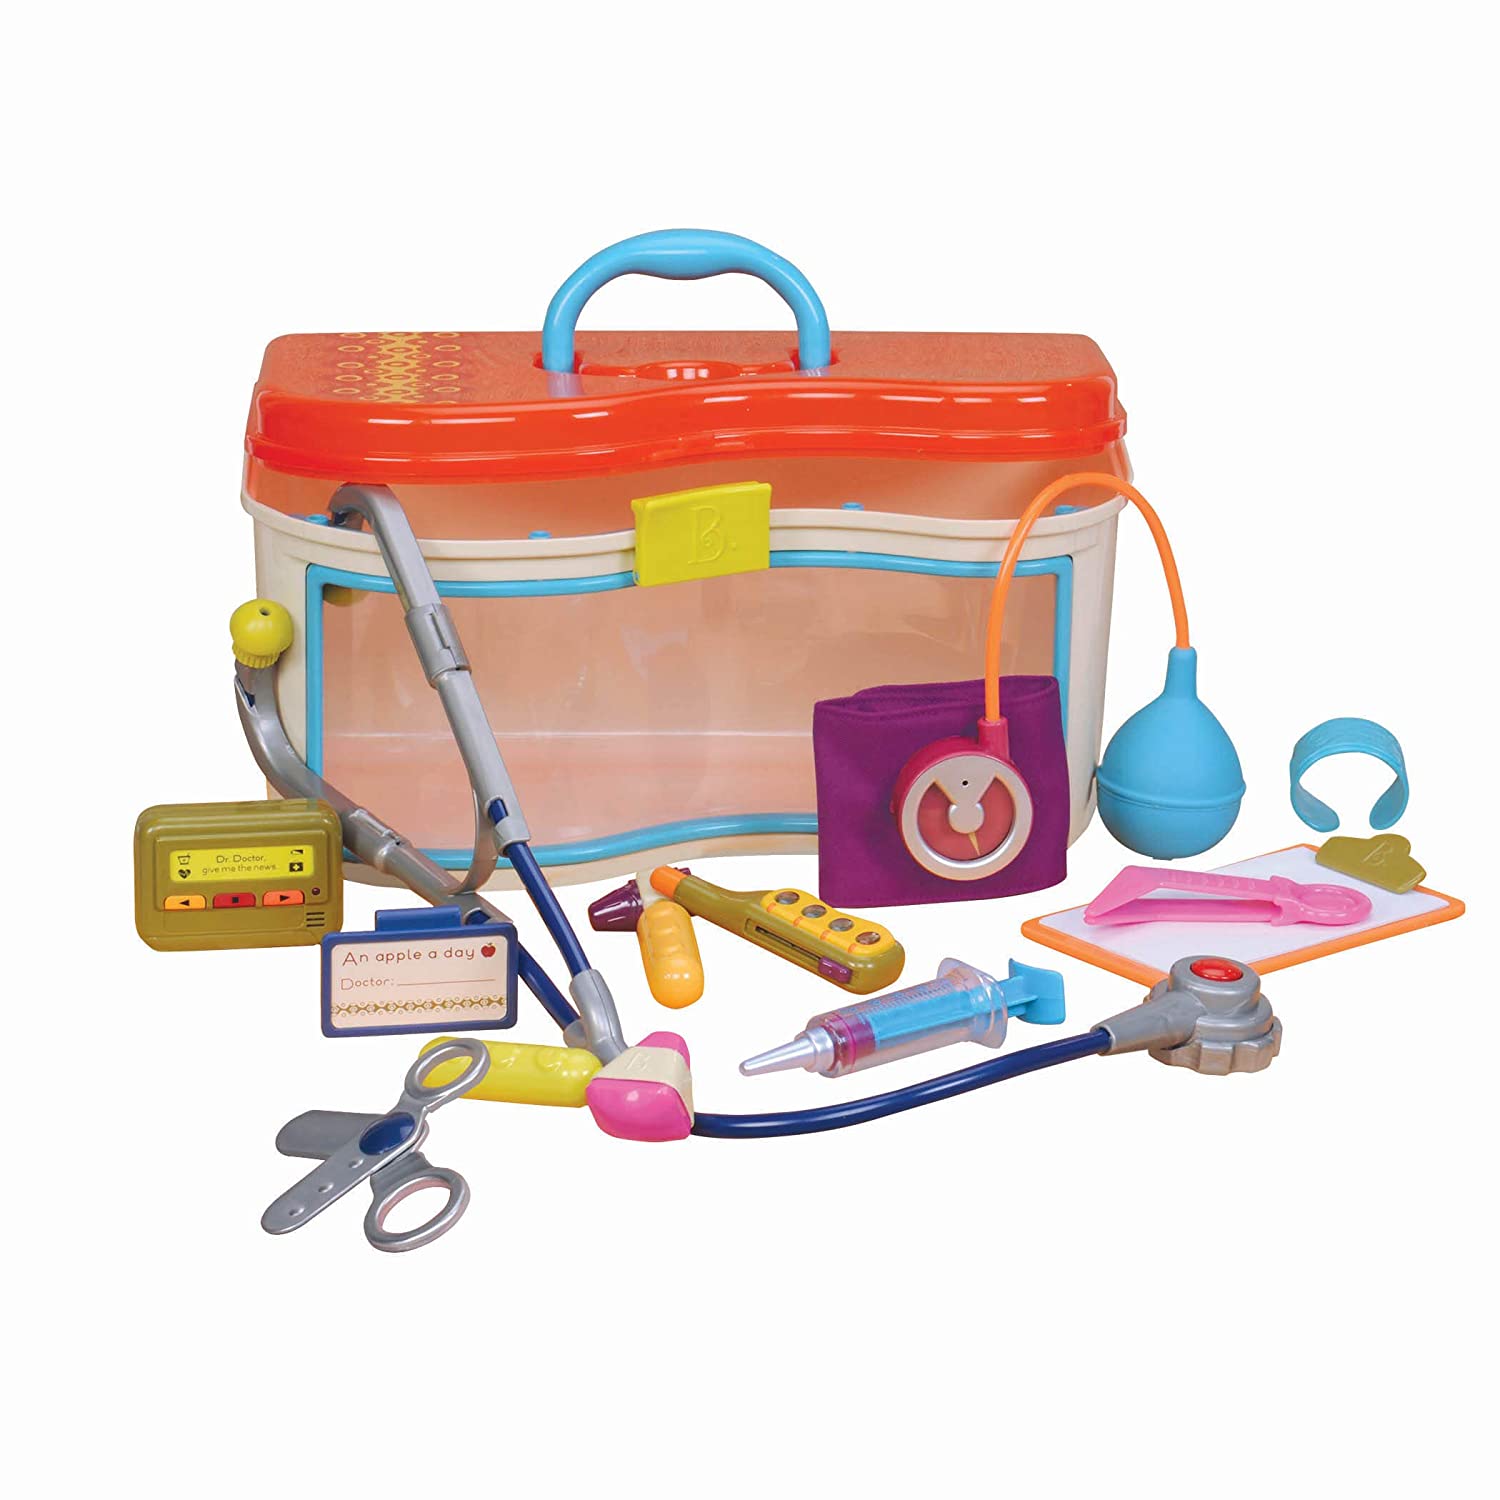 Top 9 Best Toy Doctor Kits Reviews in 2023 3